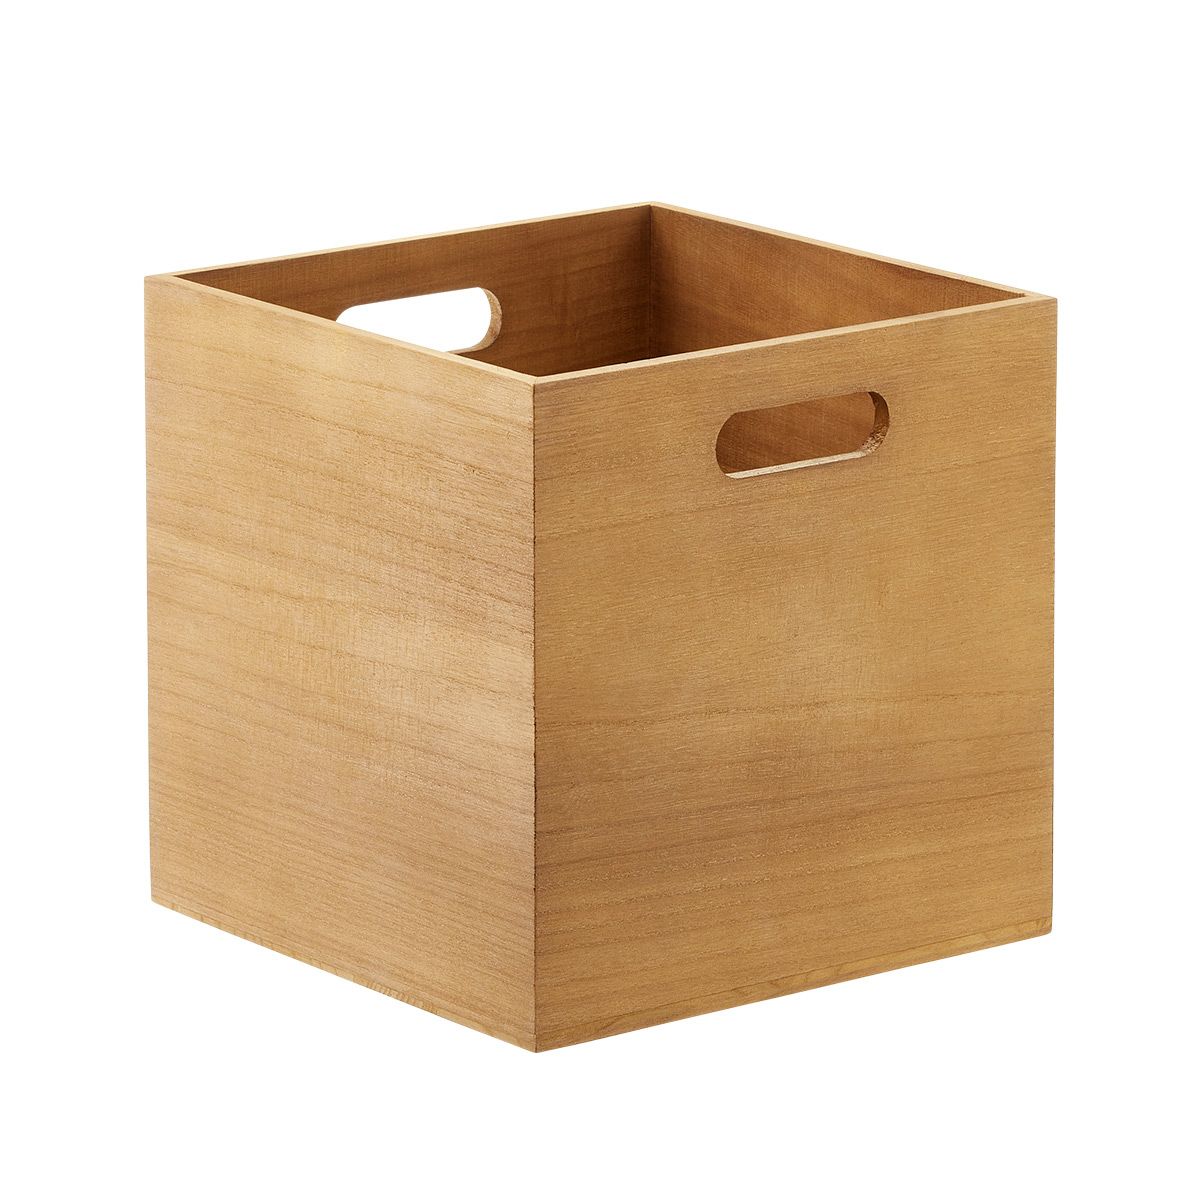 Honey Wooden Storage Cubes with Handles | The Container Store